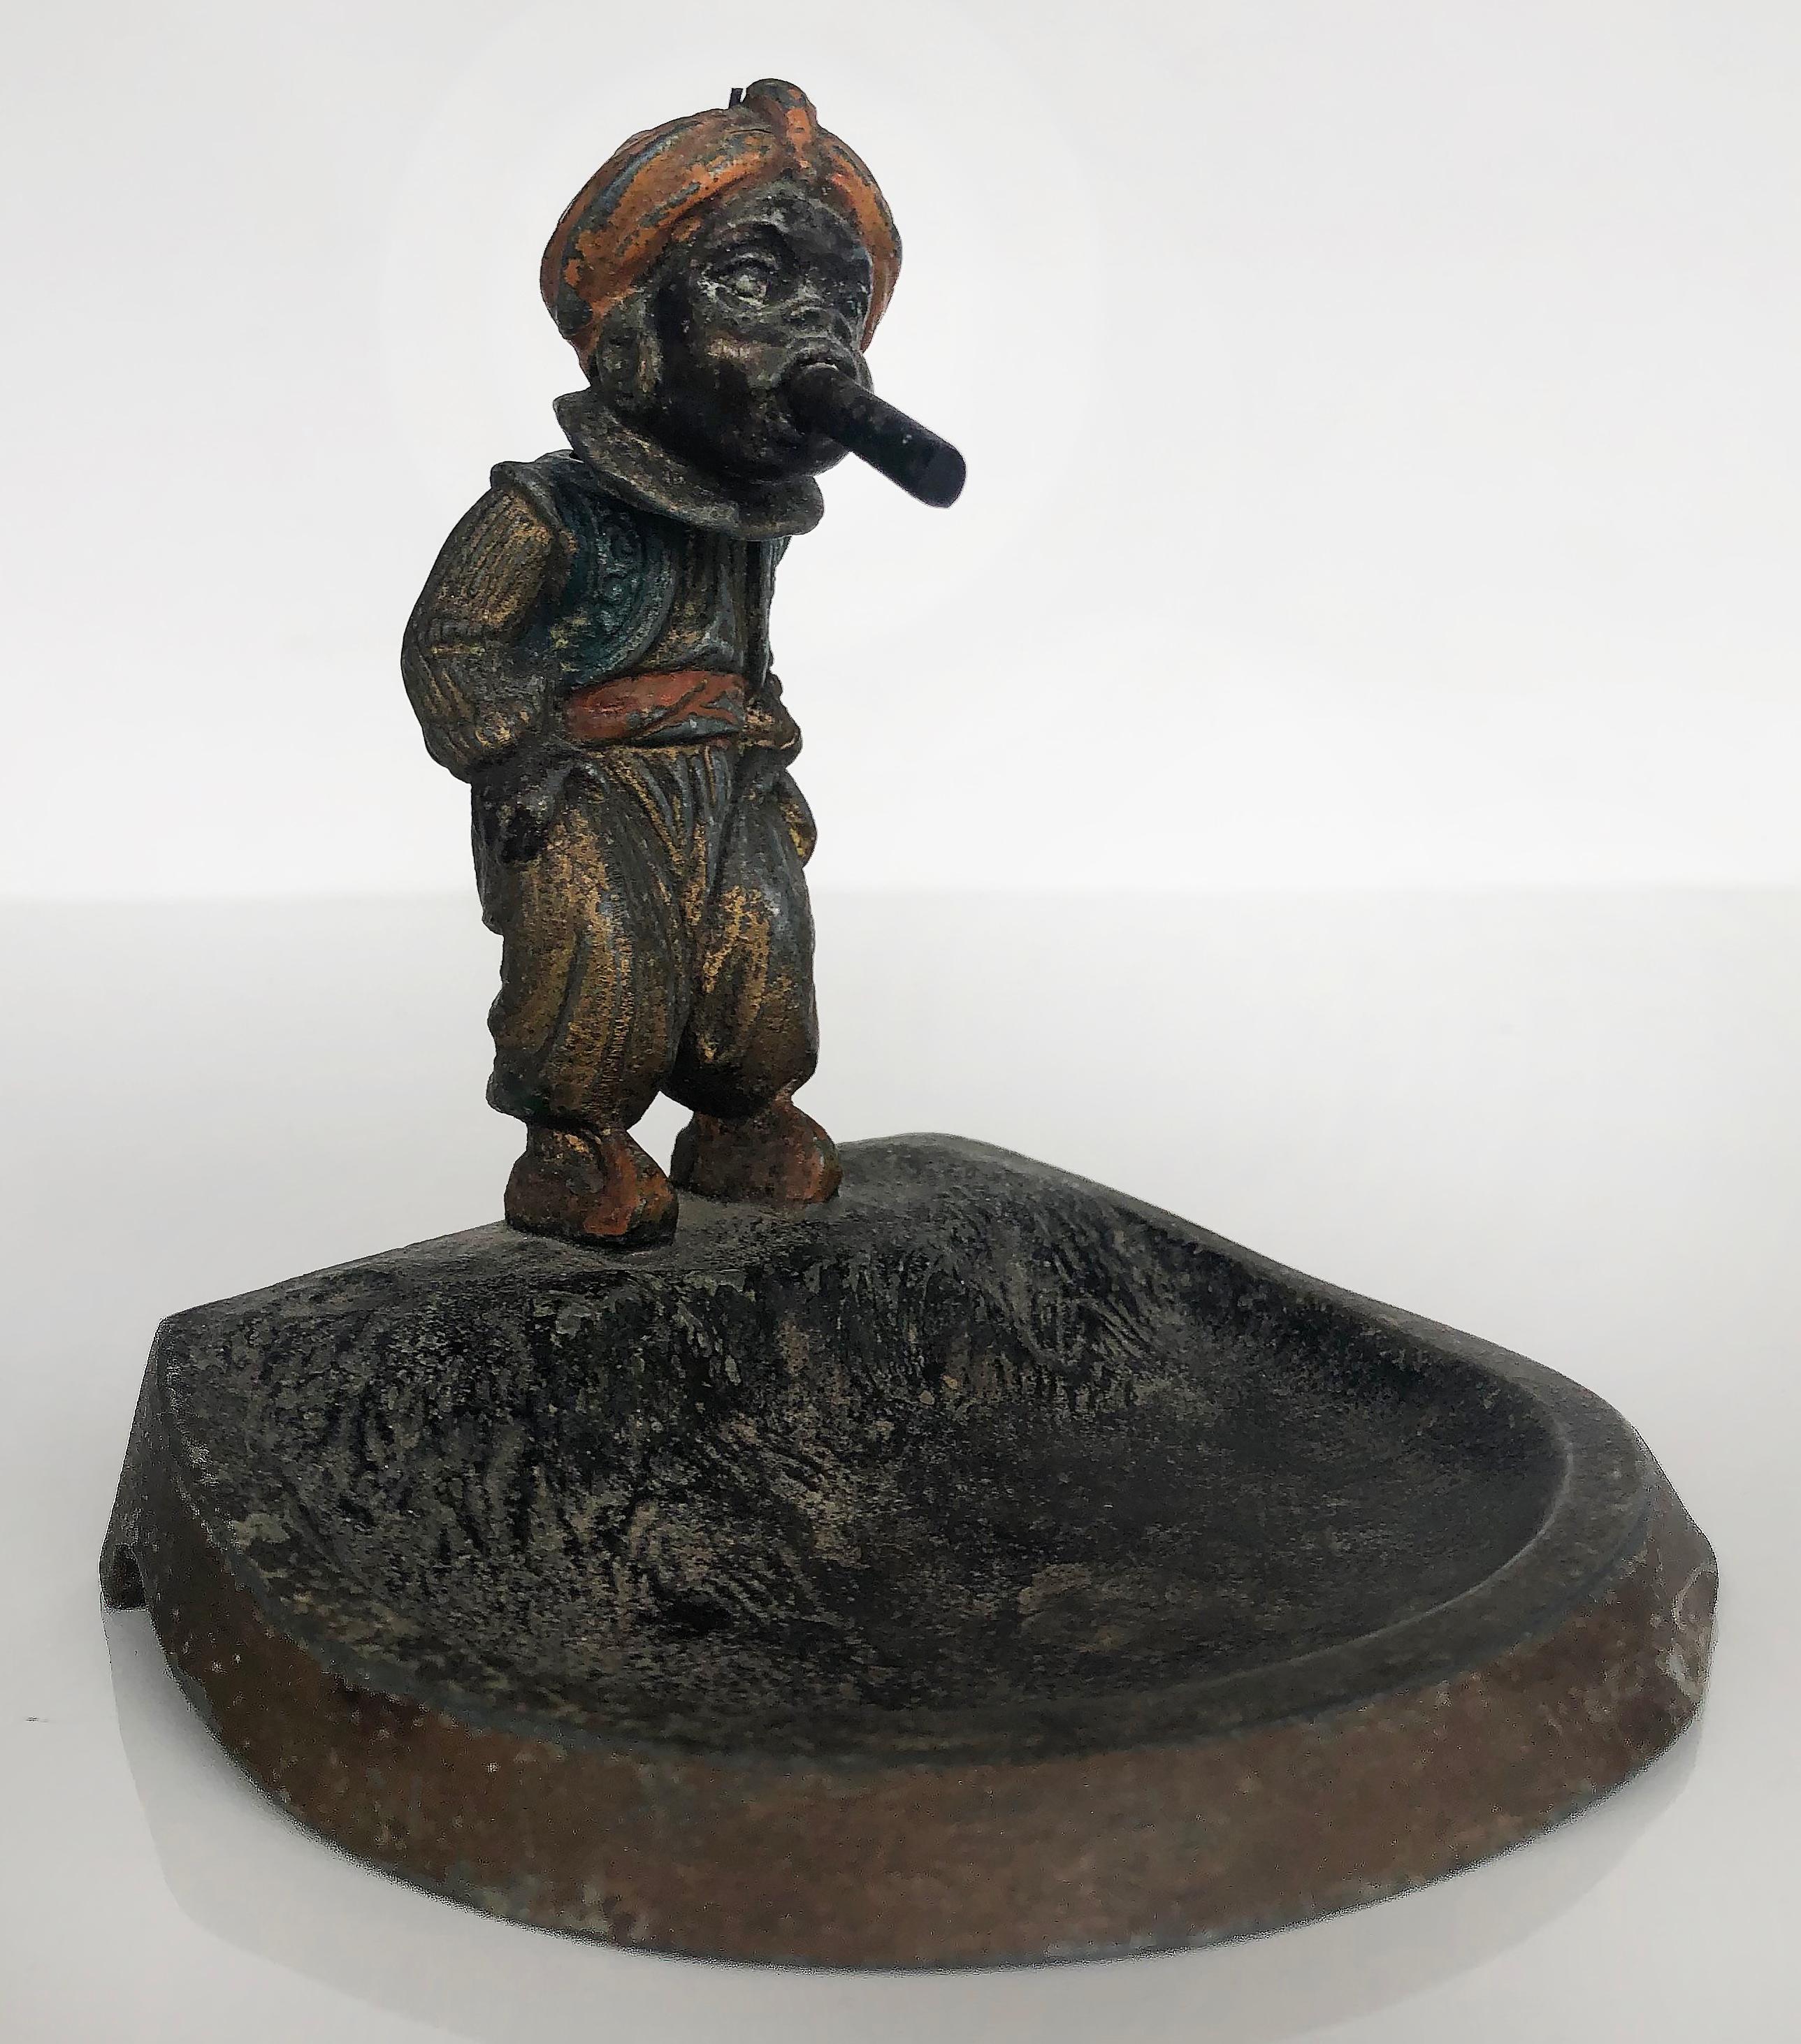 Vienna cold-painted orientalist bronze bobbing head man and opium pipe ashtray

Offered is a Vienna cold-painted Orientalist bronze of a man with a bobbing head smoking an opium pipe. This figurative sculpture is fashioned as an ashtray.